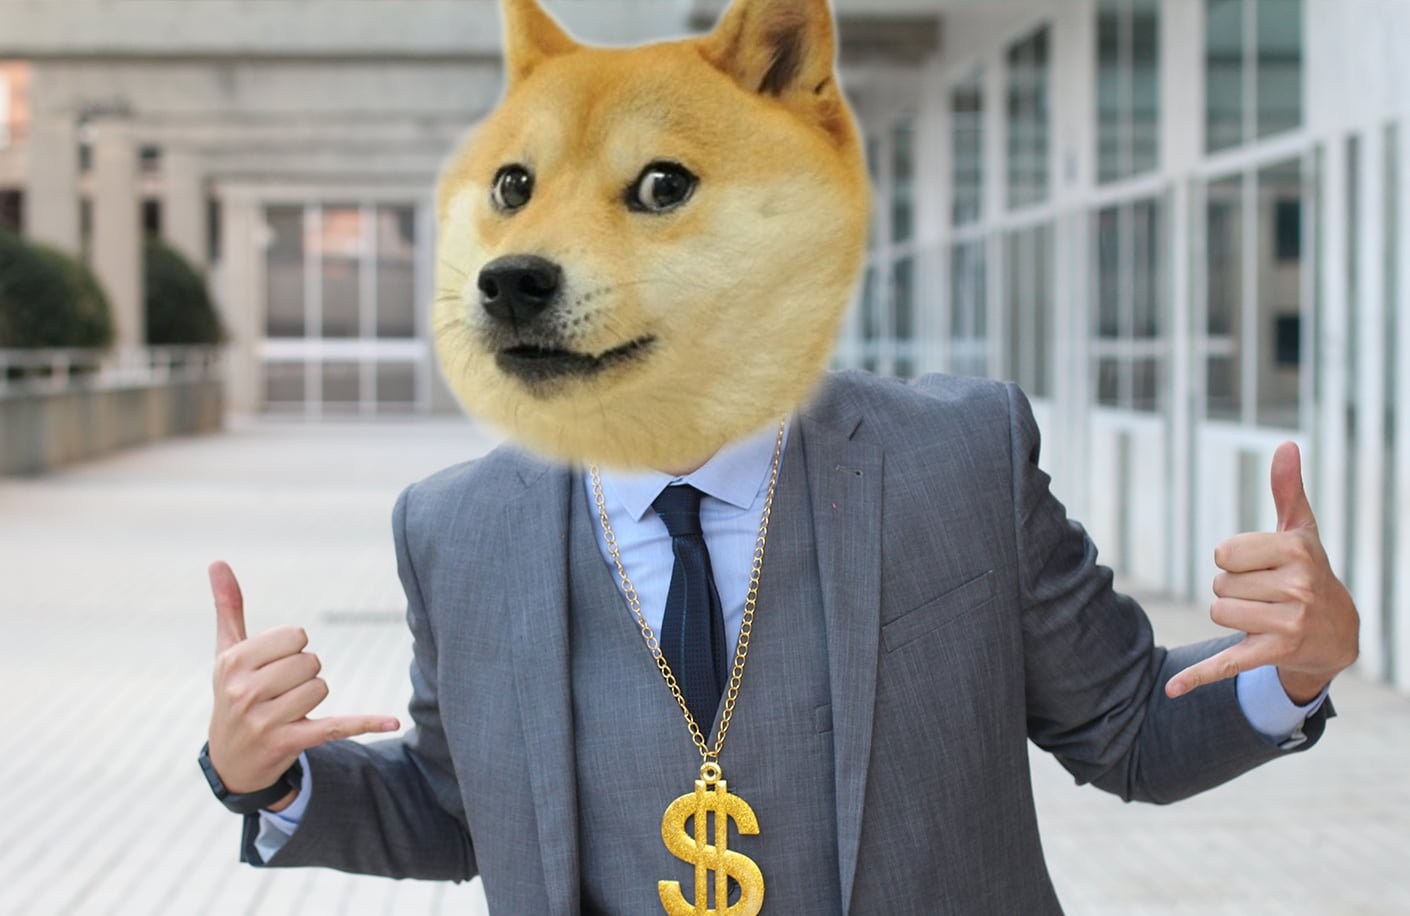 American rapper Jackson says he is down with DogeArmy 11